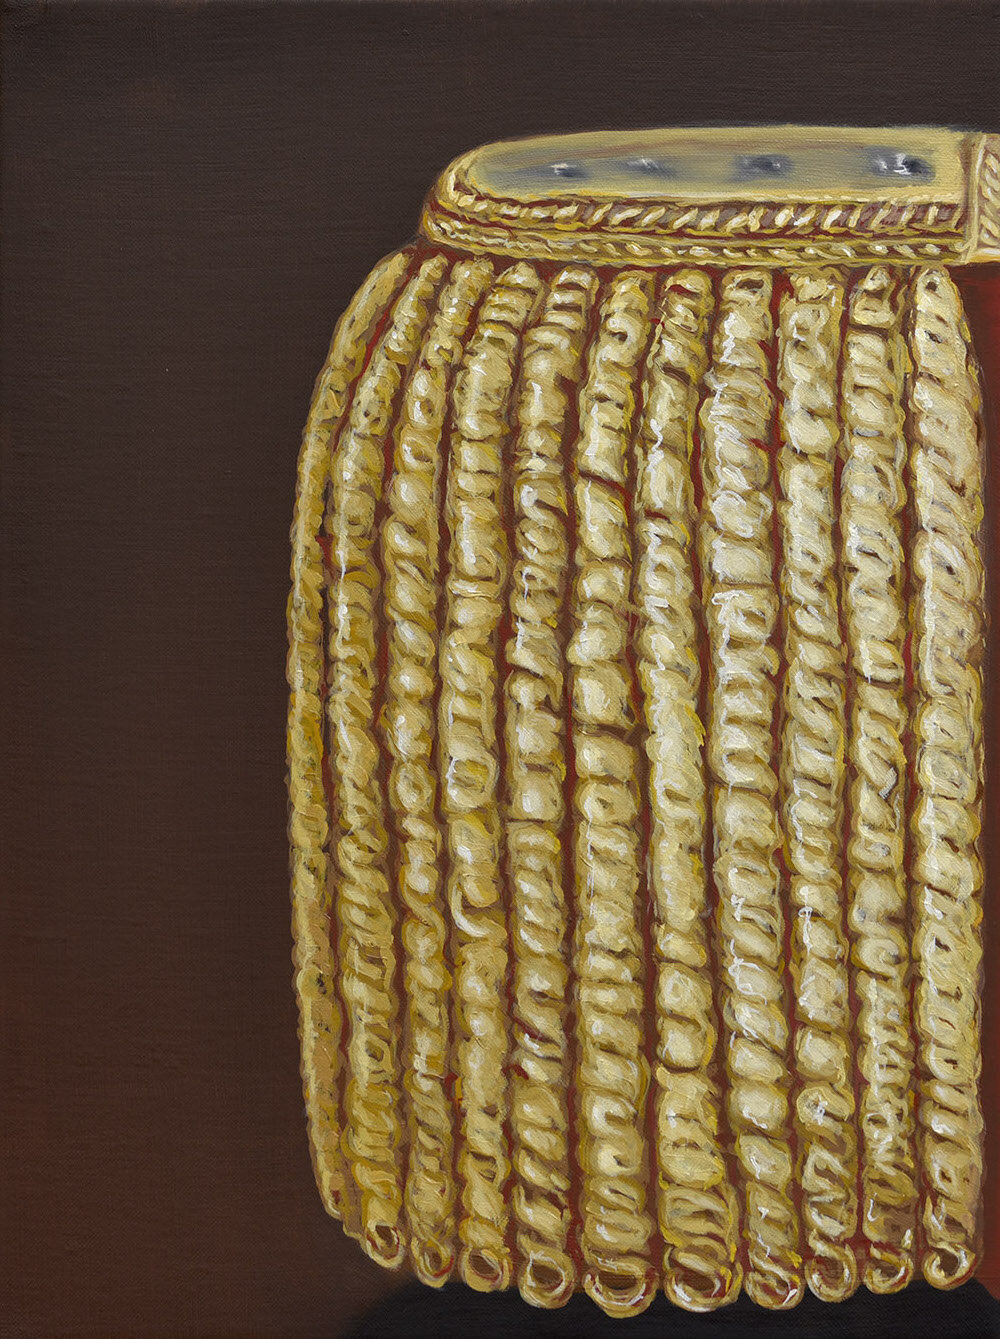 COAT OF ARMS 3, 16 x 12 inches / 40.6 x 30.4 cm, oil on linen, 2020